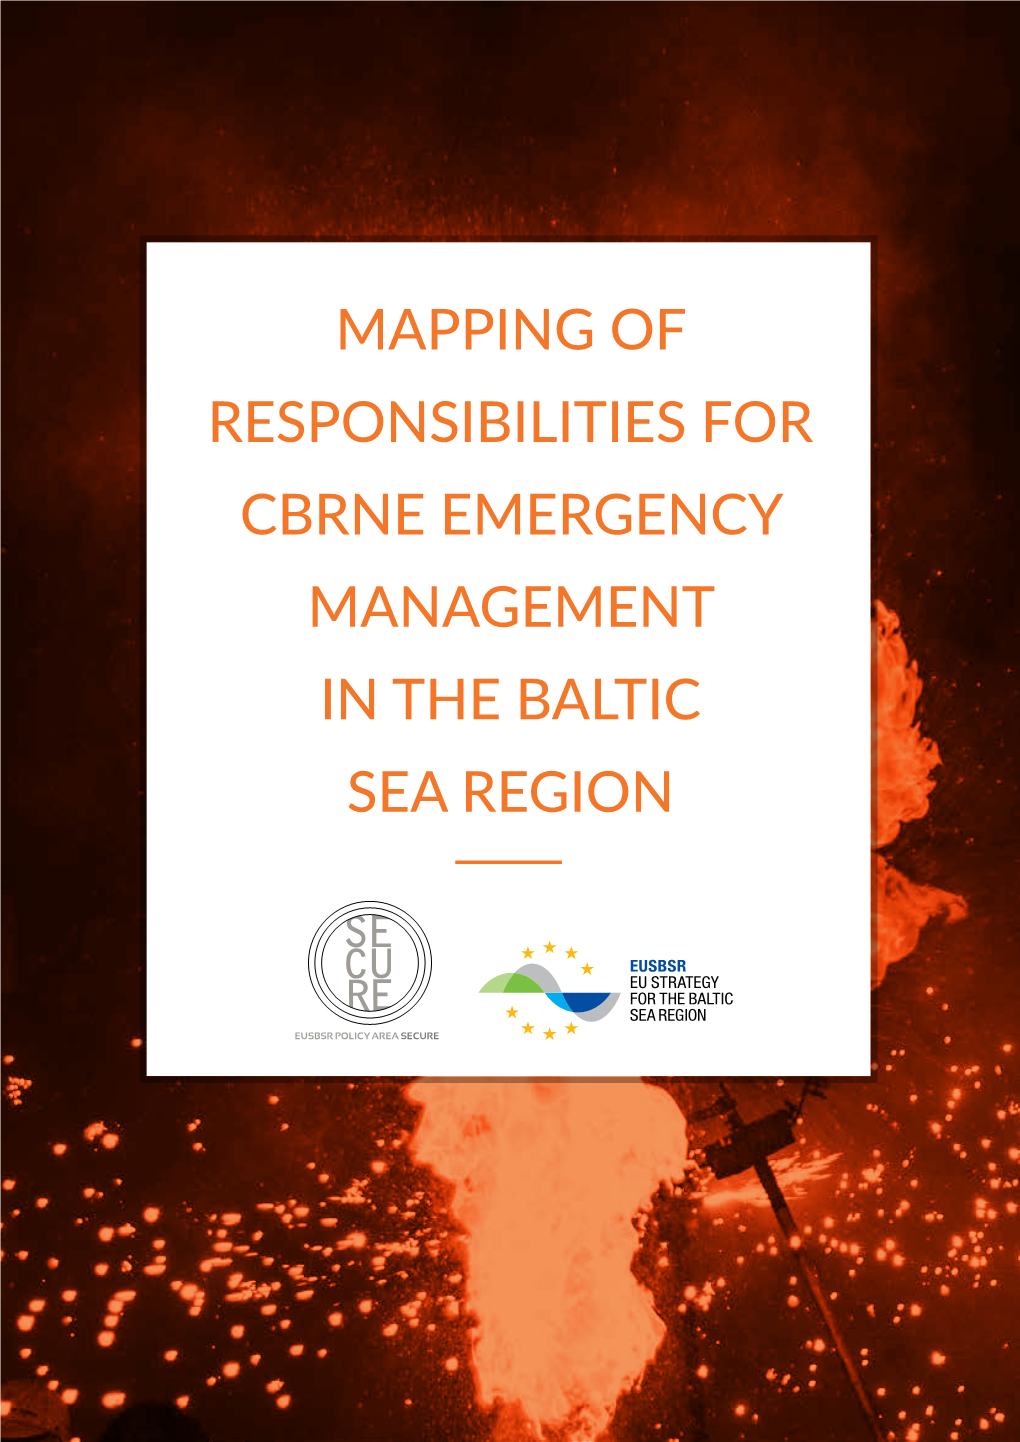 Mapping of Responsibilities for Cbrne Emergency Management in the Baltic Sea Region